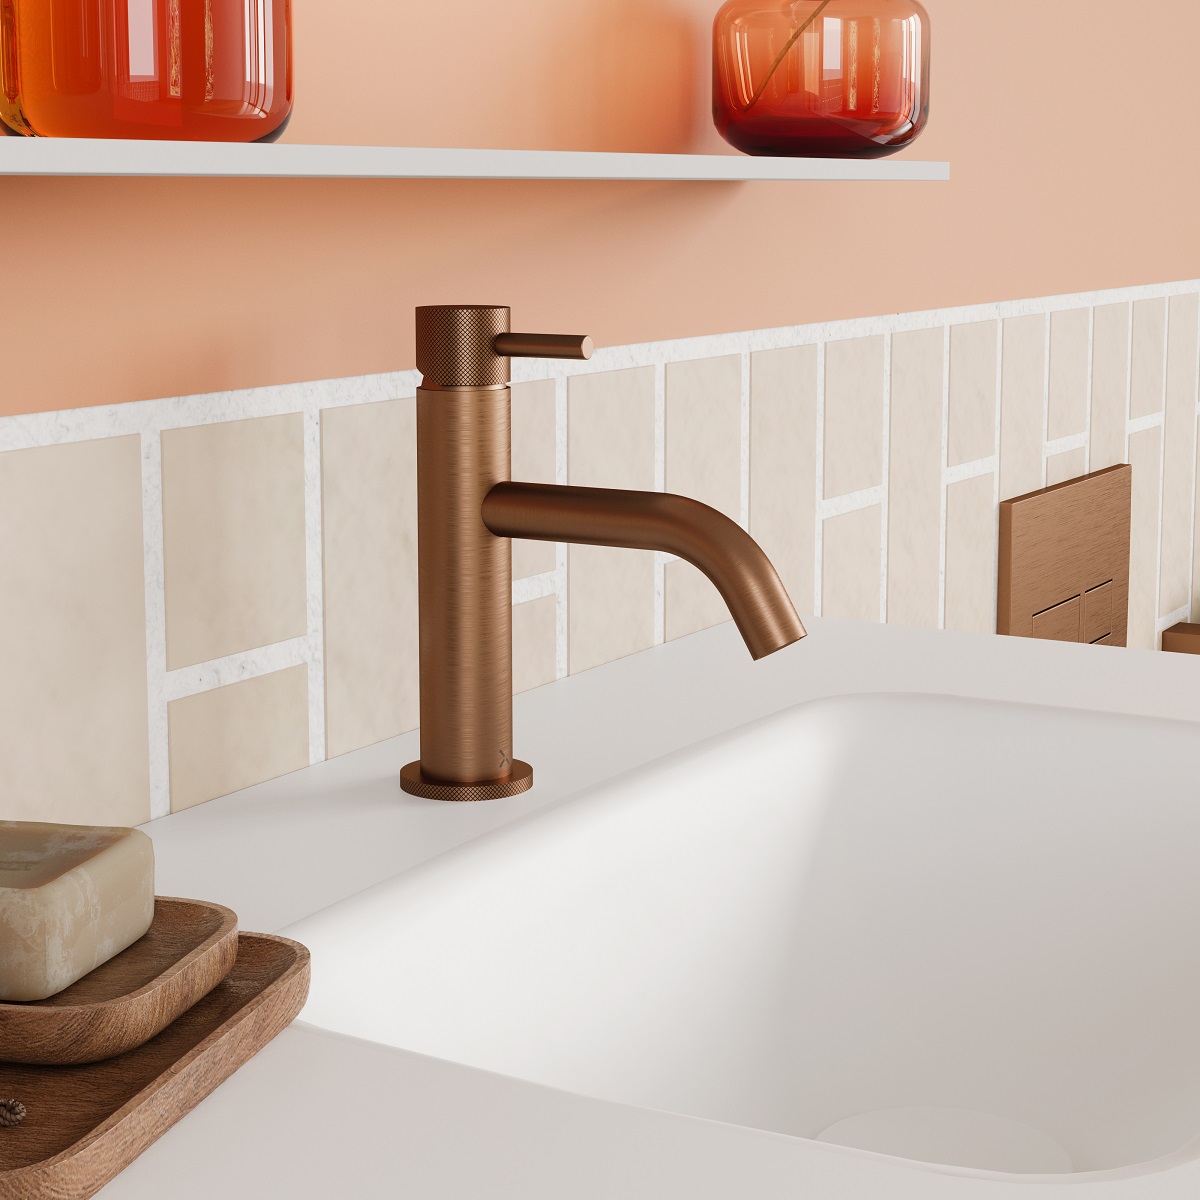 bathroom sink with brushed bronze tap, peach walls and orange glass container on shelf